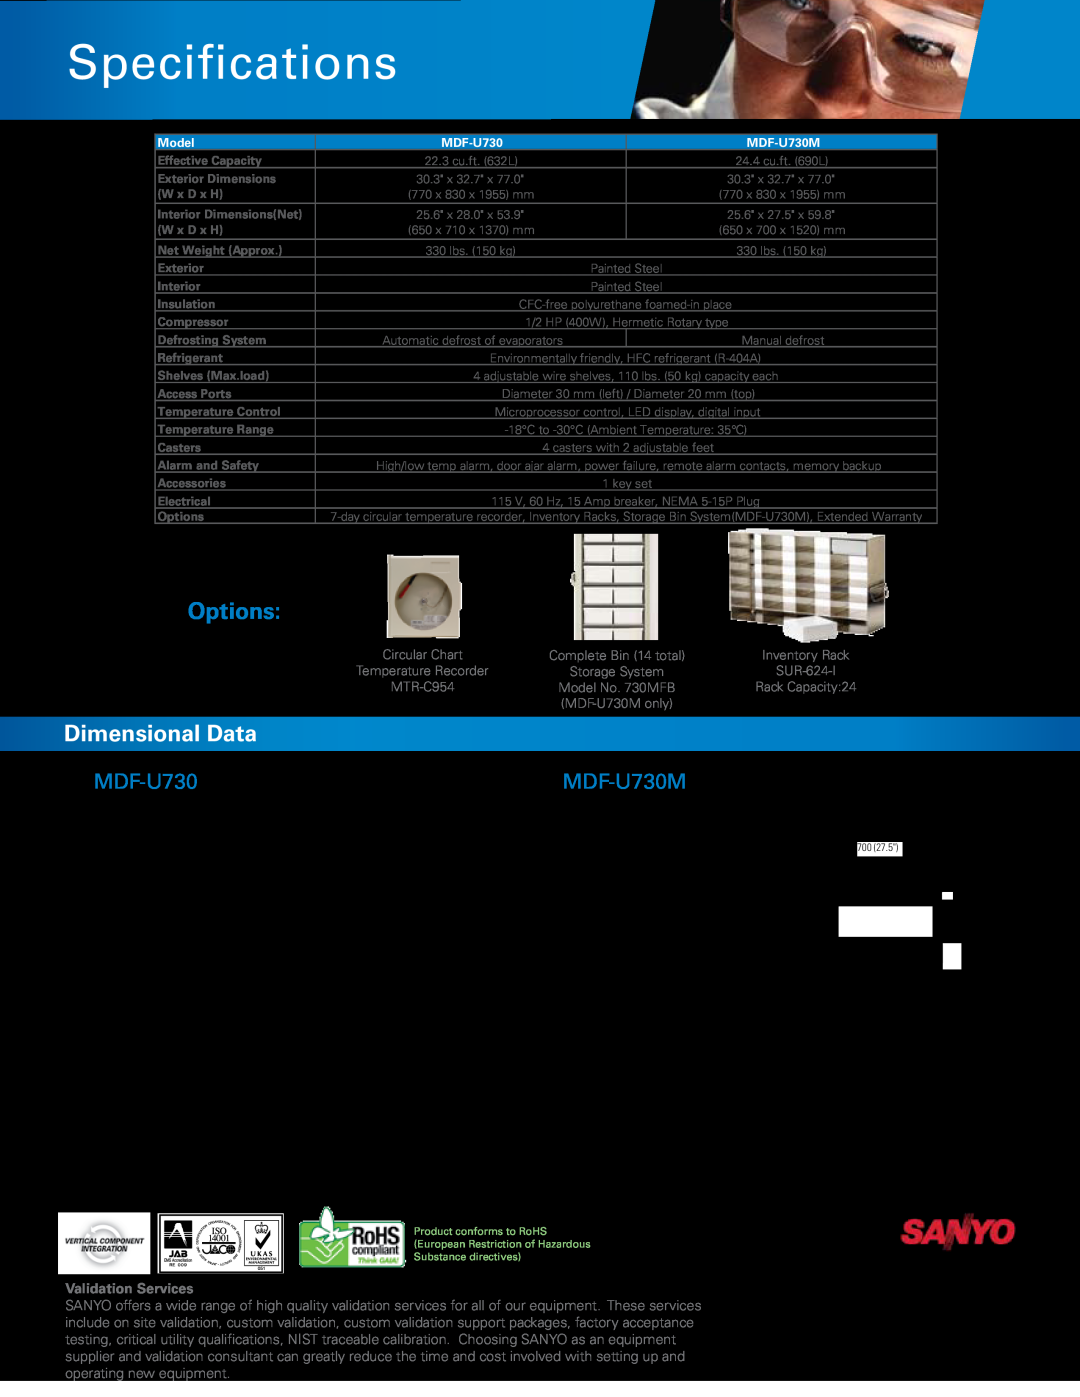 Sanyo Specifications, Options, Dimensional Data, MDF-U730M, Validation Services, Model, Painted Steel, Manual defrost 